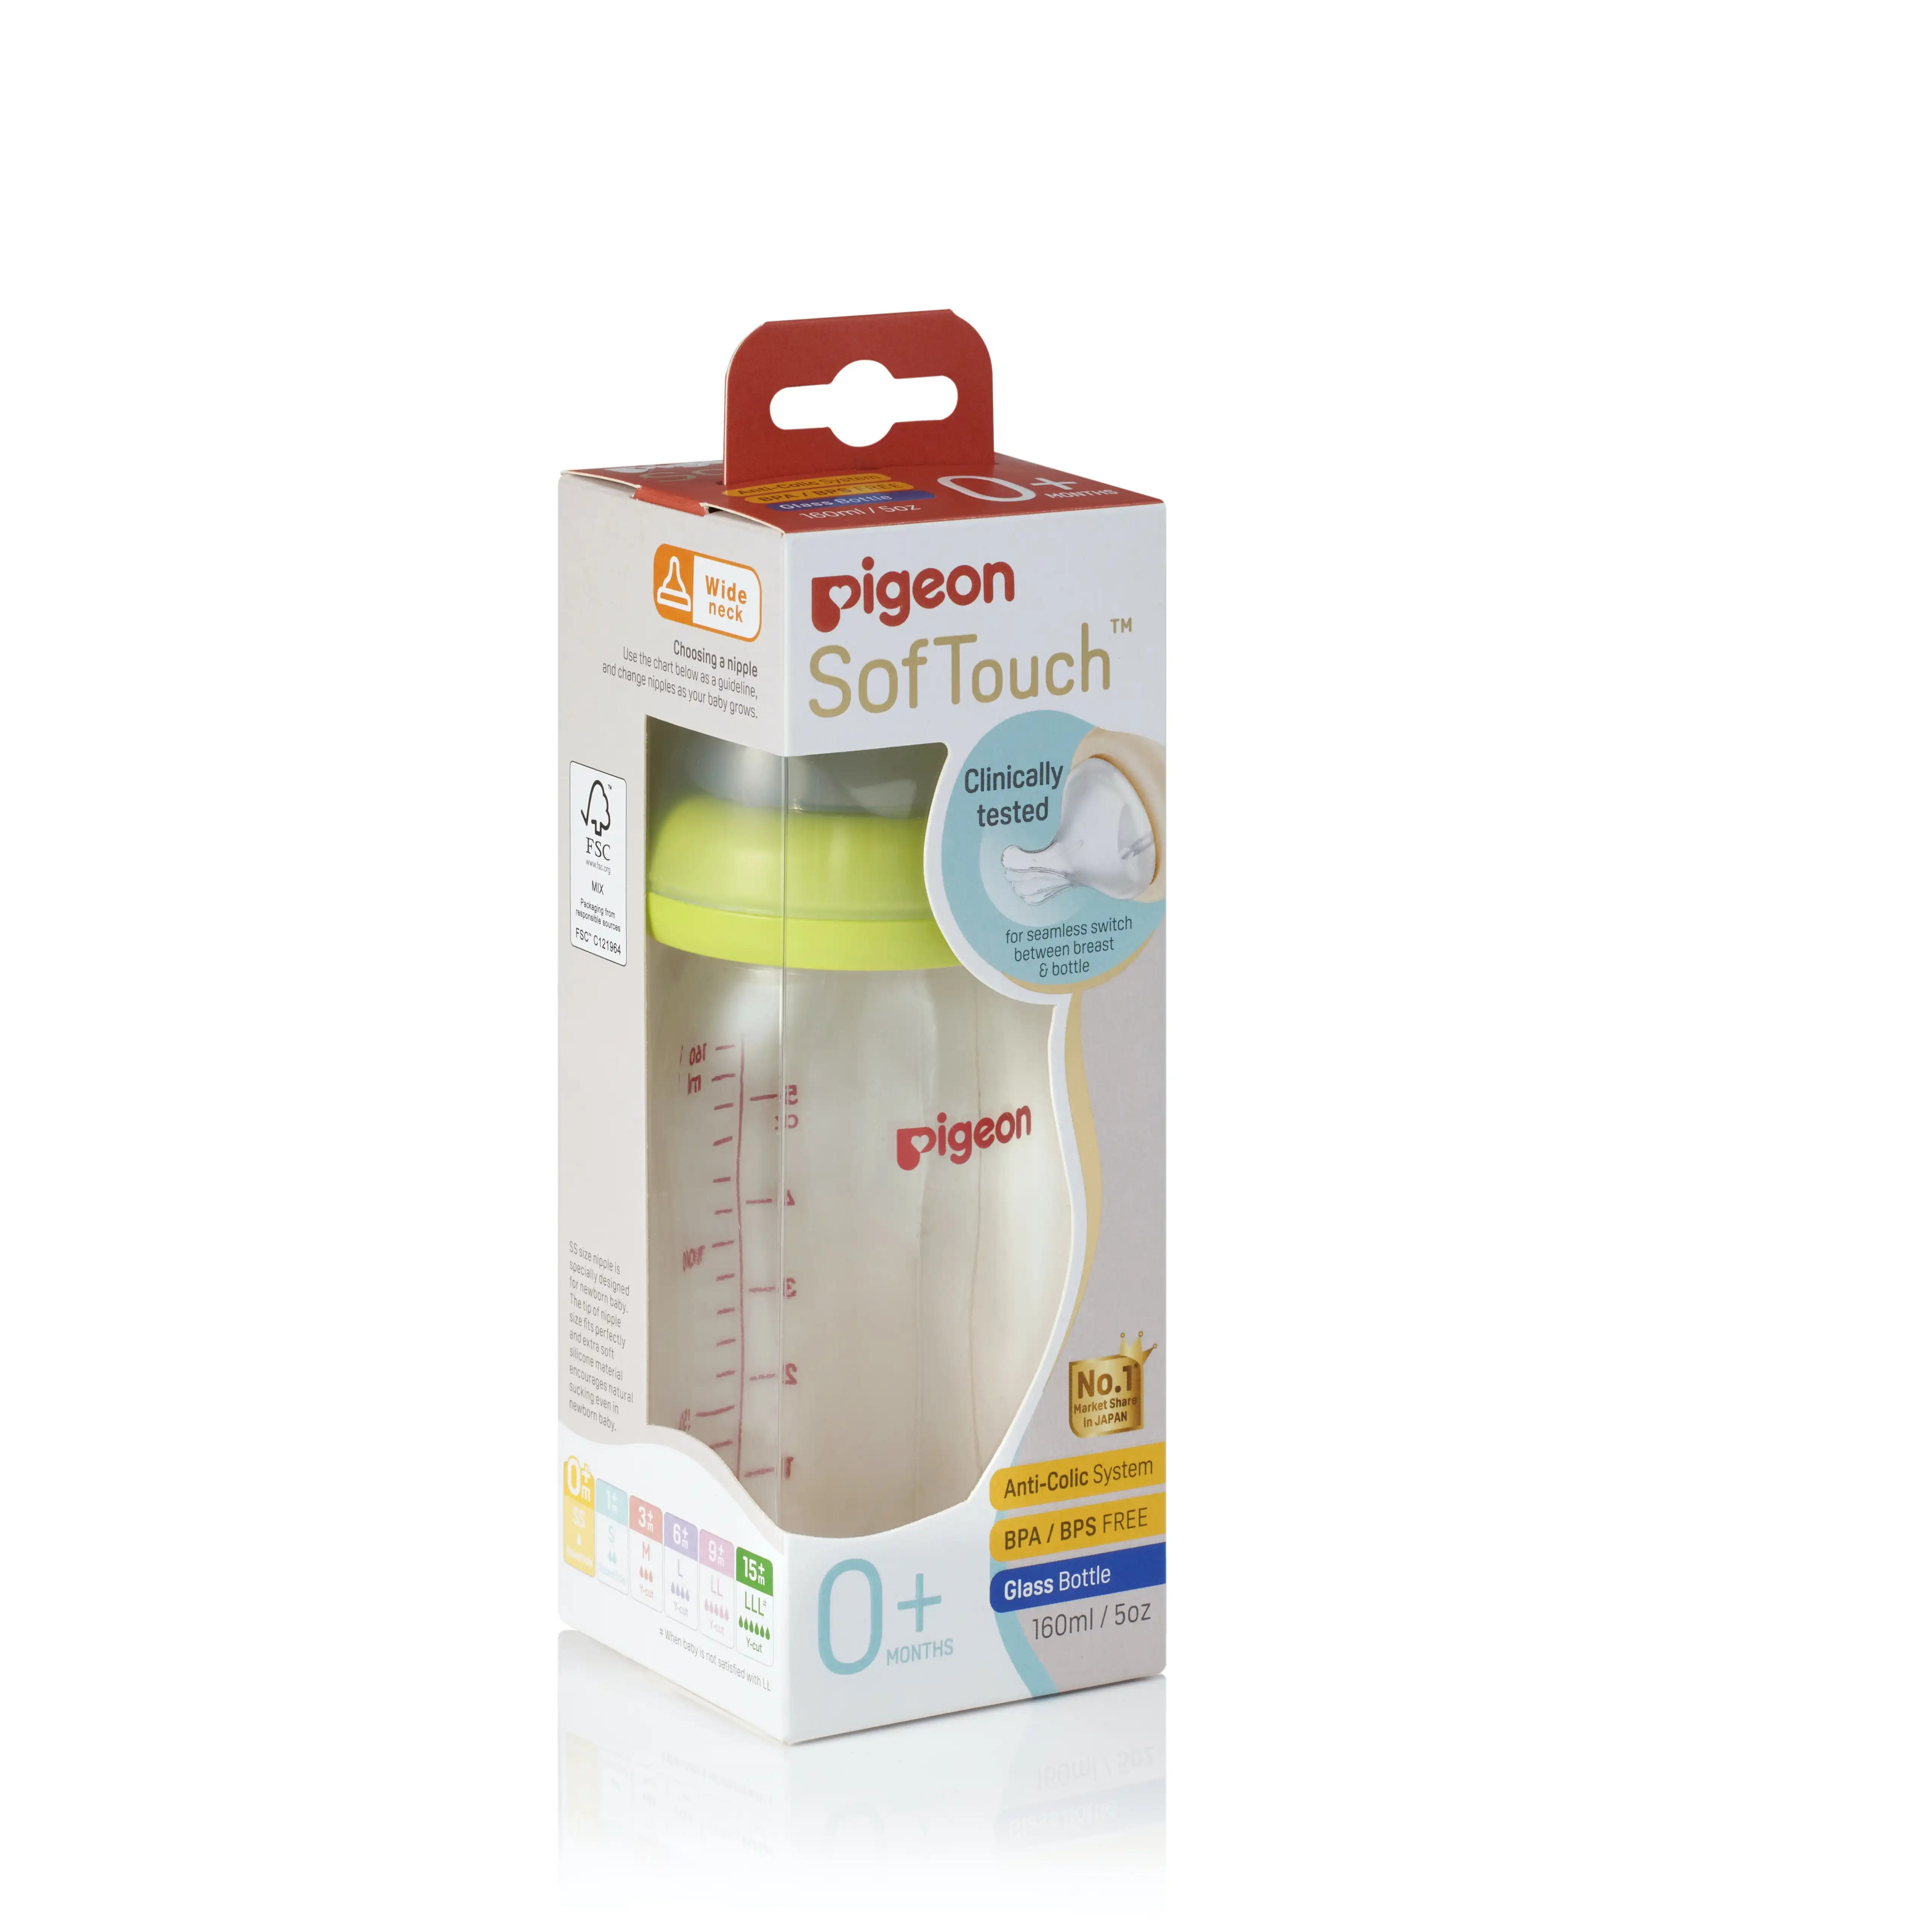 PIGEON SofTouch Bottle GLASS 160ml